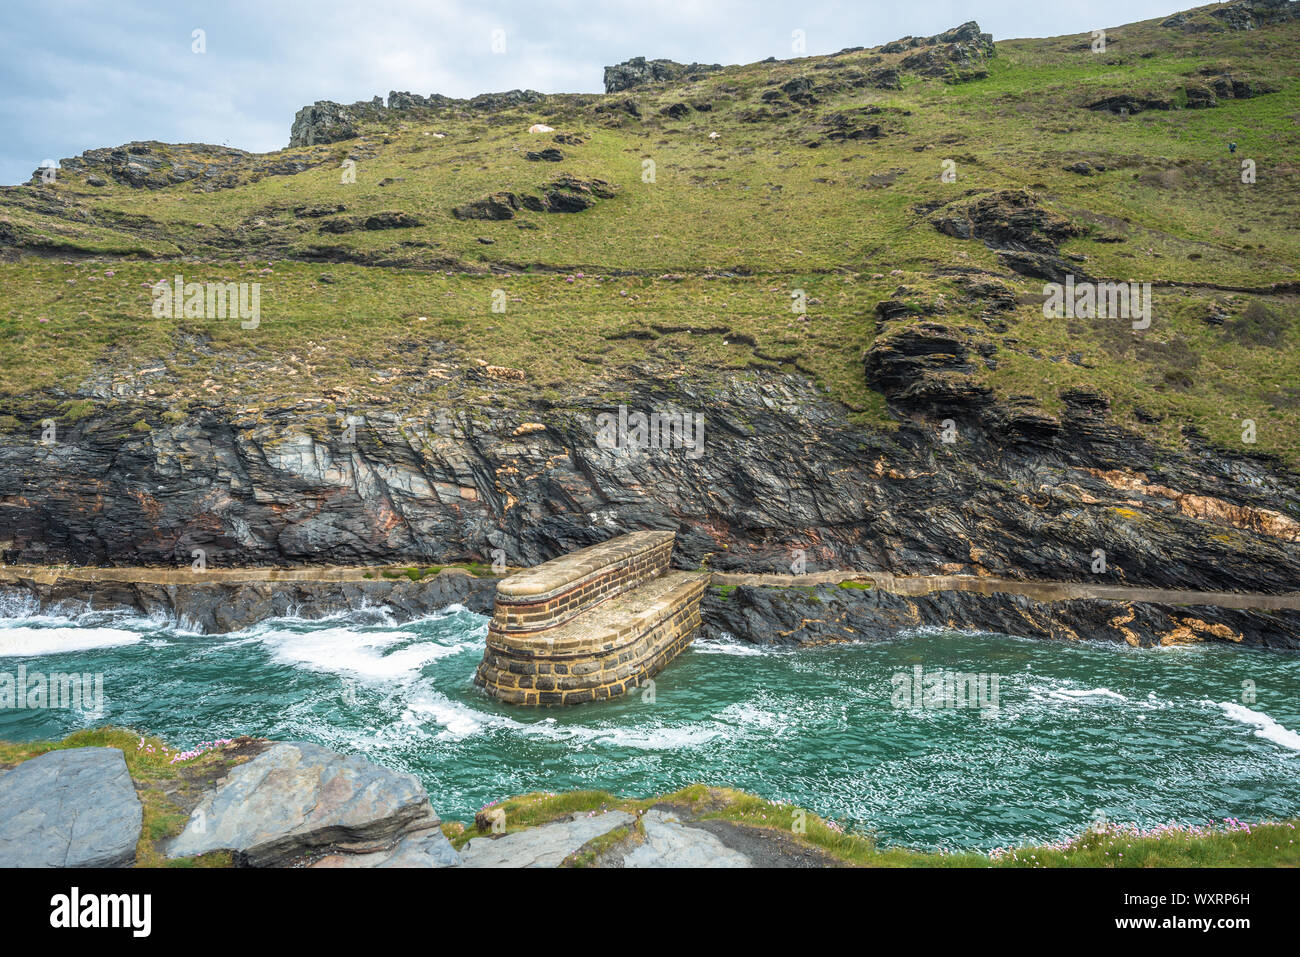 Entrance of Boscastle Harbour in North Cornwall, England, UK. Stock Photo